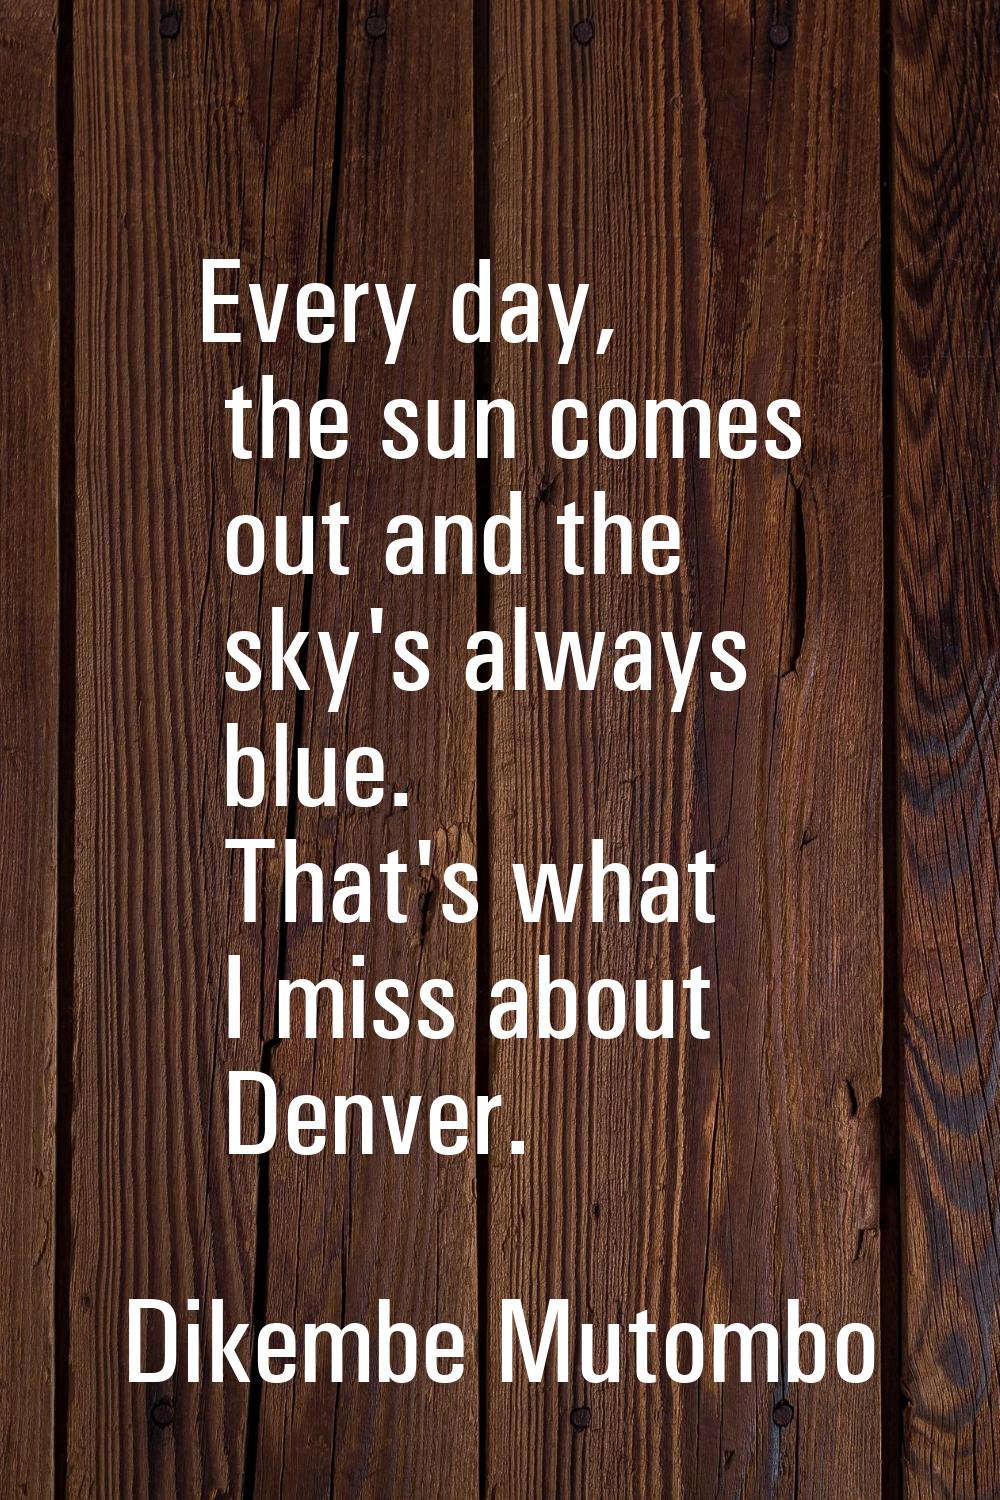 Every day, the sun comes out and the sky's always blue. That's what I miss about Denver.